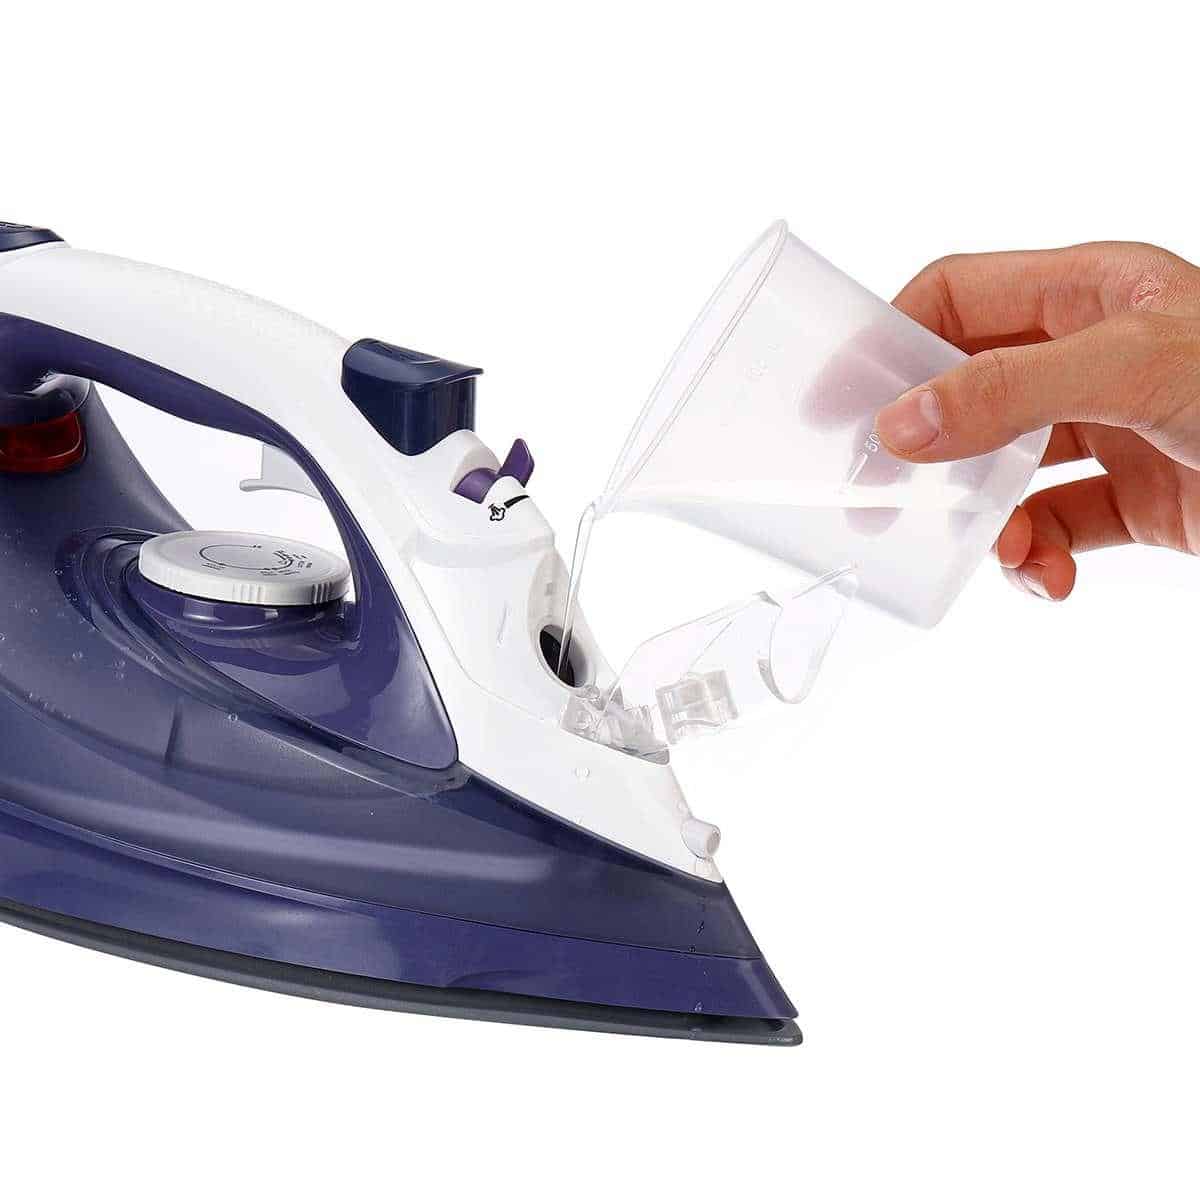 2400W Cordless Electric Steam Iron 2 in 1 Ceramic Soleplate Garment Steamer Travel Home Iron Ironing Machine New Arrival 2020